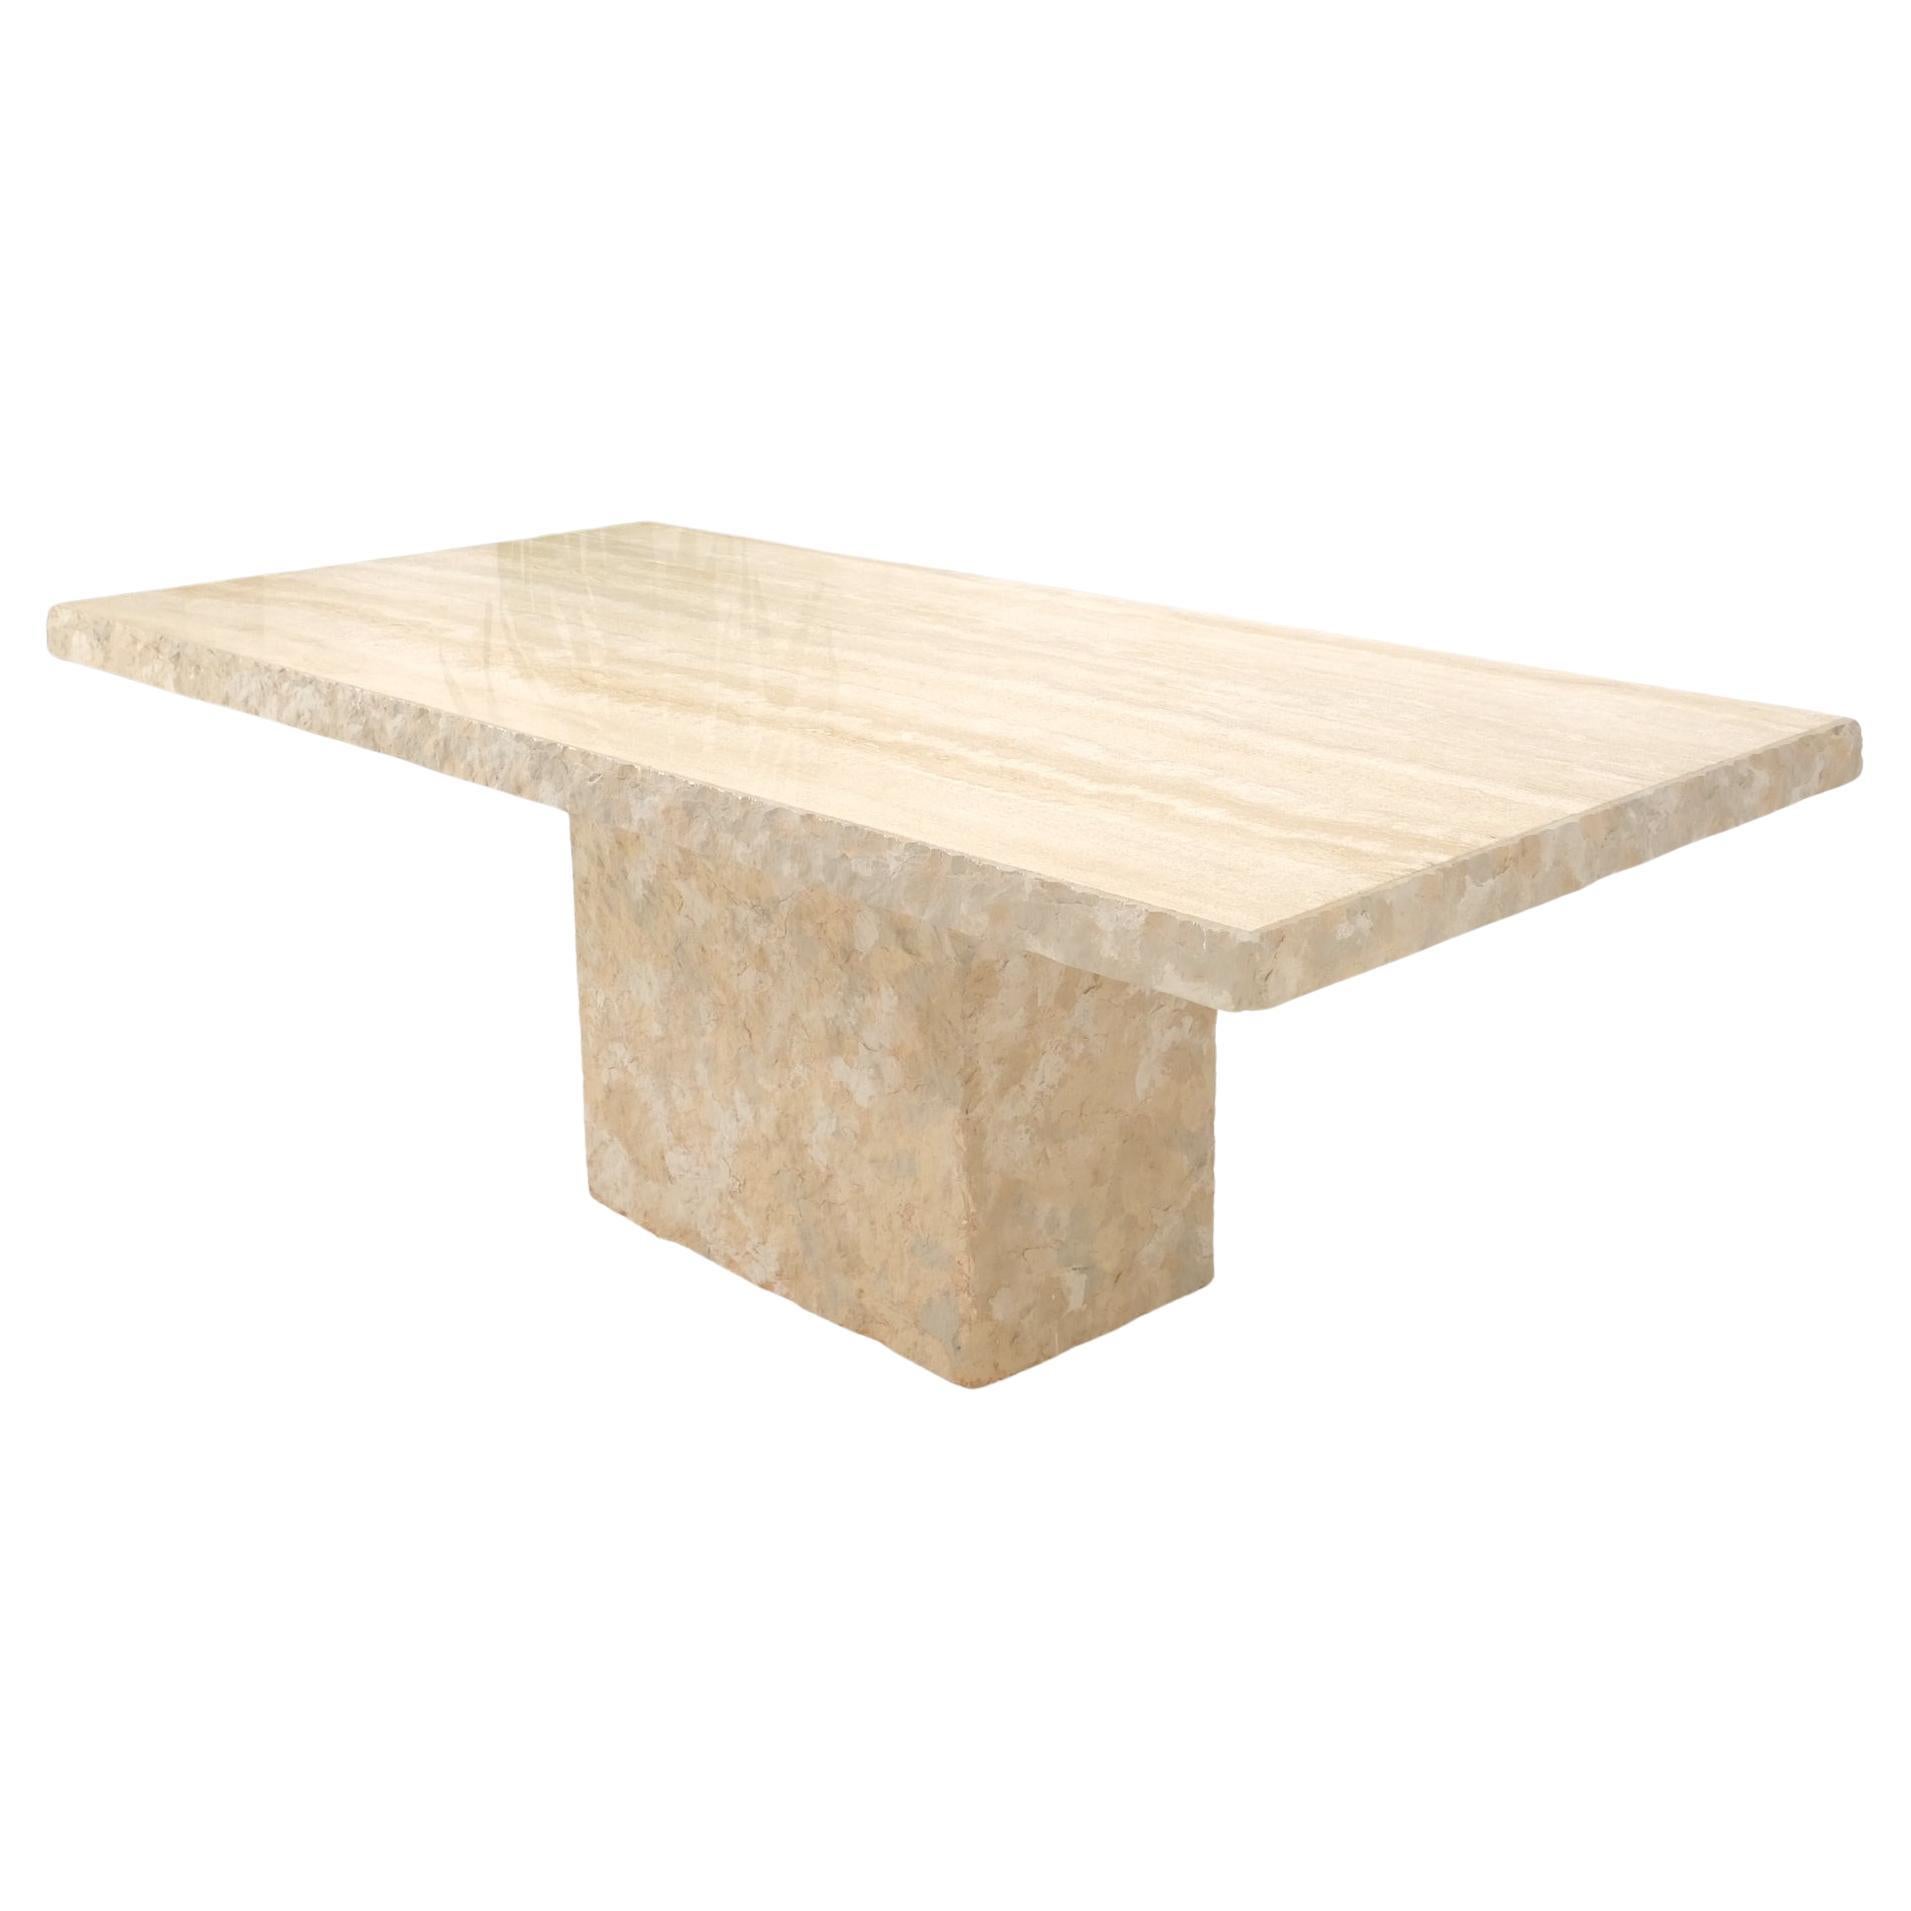 Single Pedestal Rectangle Travertine "Live" Edge Dining Conference Table Italy For Sale